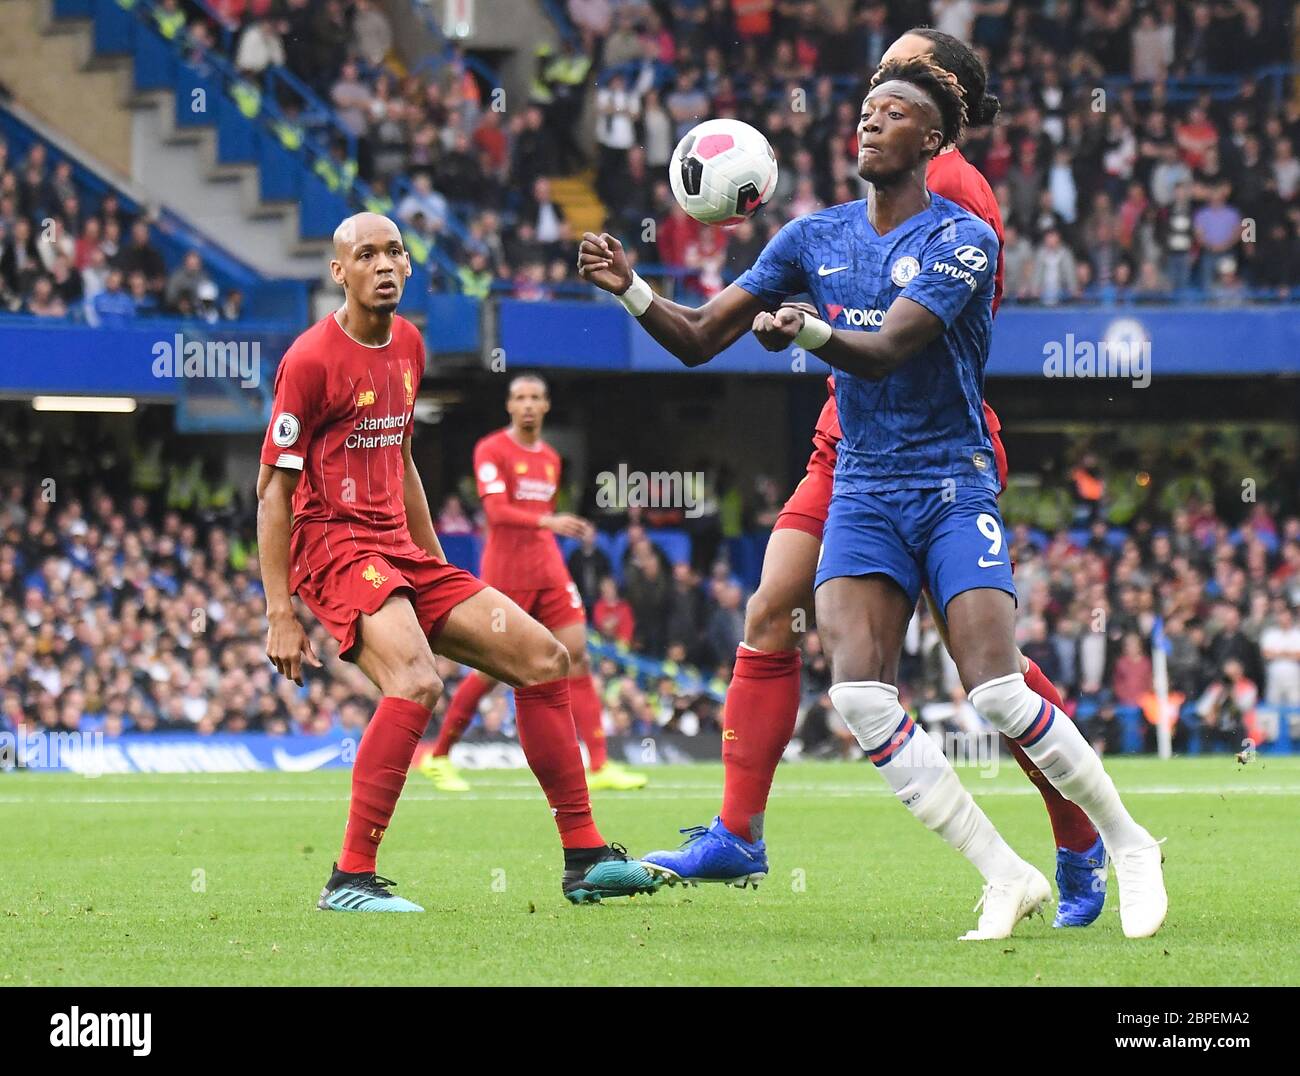 LONDON, ENGLAND - SEPTEMBER 22, 2019: Tammy Abraham of Chelsea pictured during the 2019/20 Premier League game between Chelsea FC and Liverpool FC at Stamford Bridge. Stock Photo